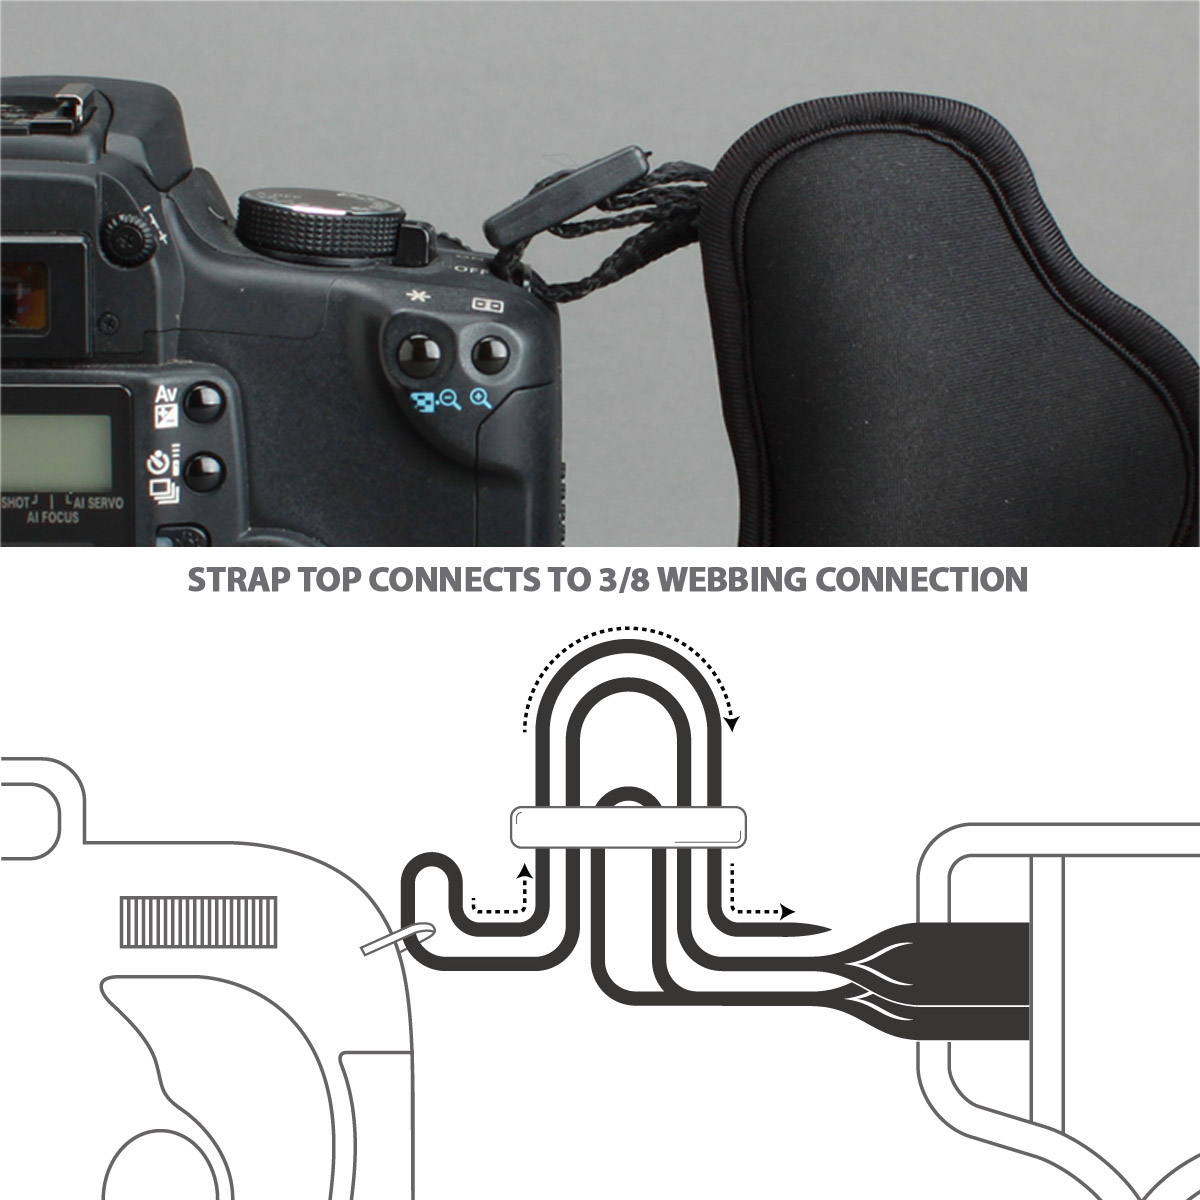 USA GEAR Professional Camera Grip Hand Strap - image 3 of 9